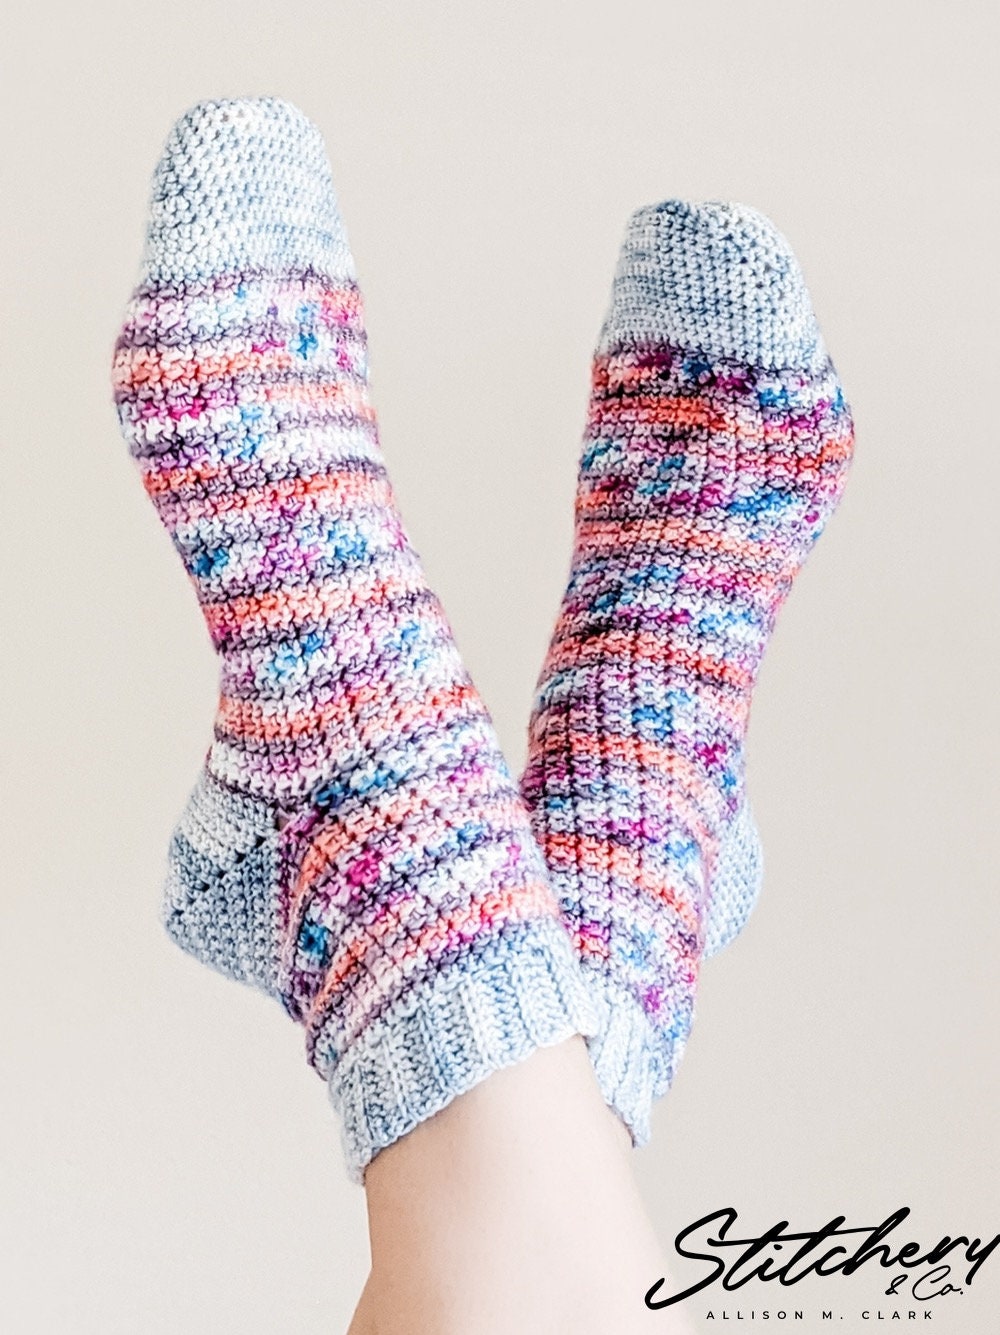 A pair of crochet socks made by Alison at Stitchery and Co out of our Teresina, Blue Ridge, and Edgar Allan Poe colorways.